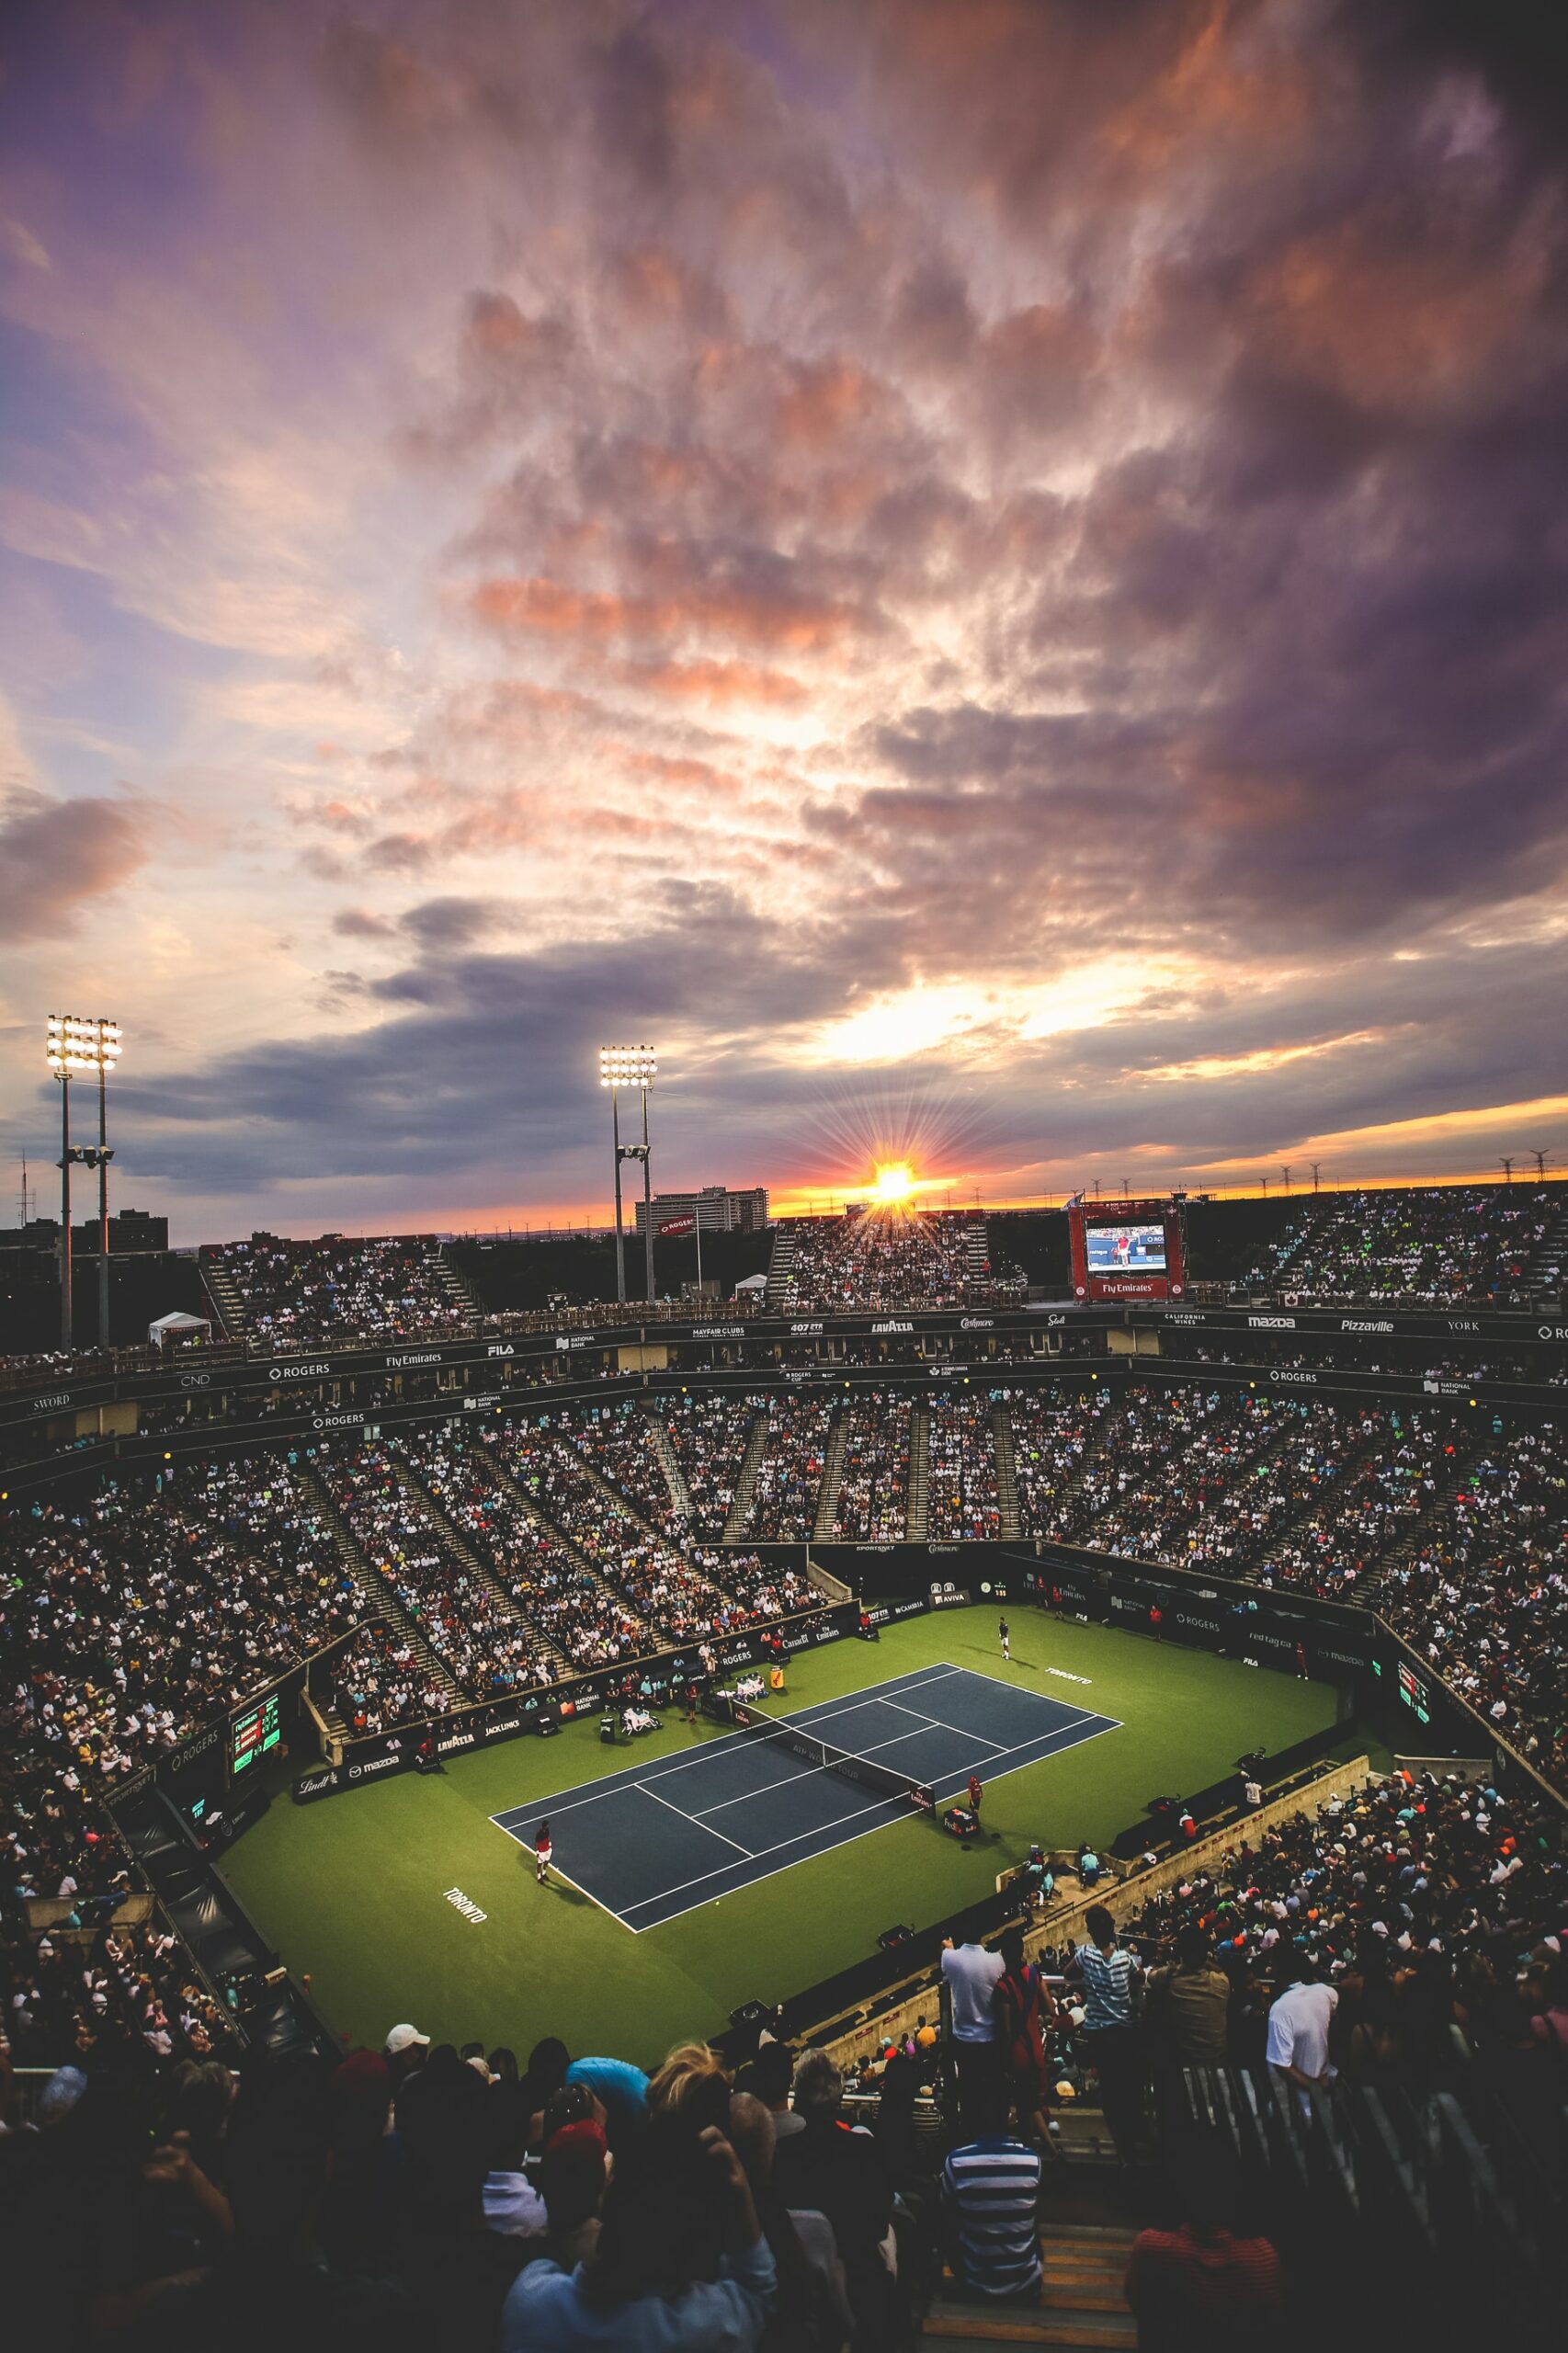 Sports Fanatics Unite!: Top 7 Cities to Catch an Unforgettable Match